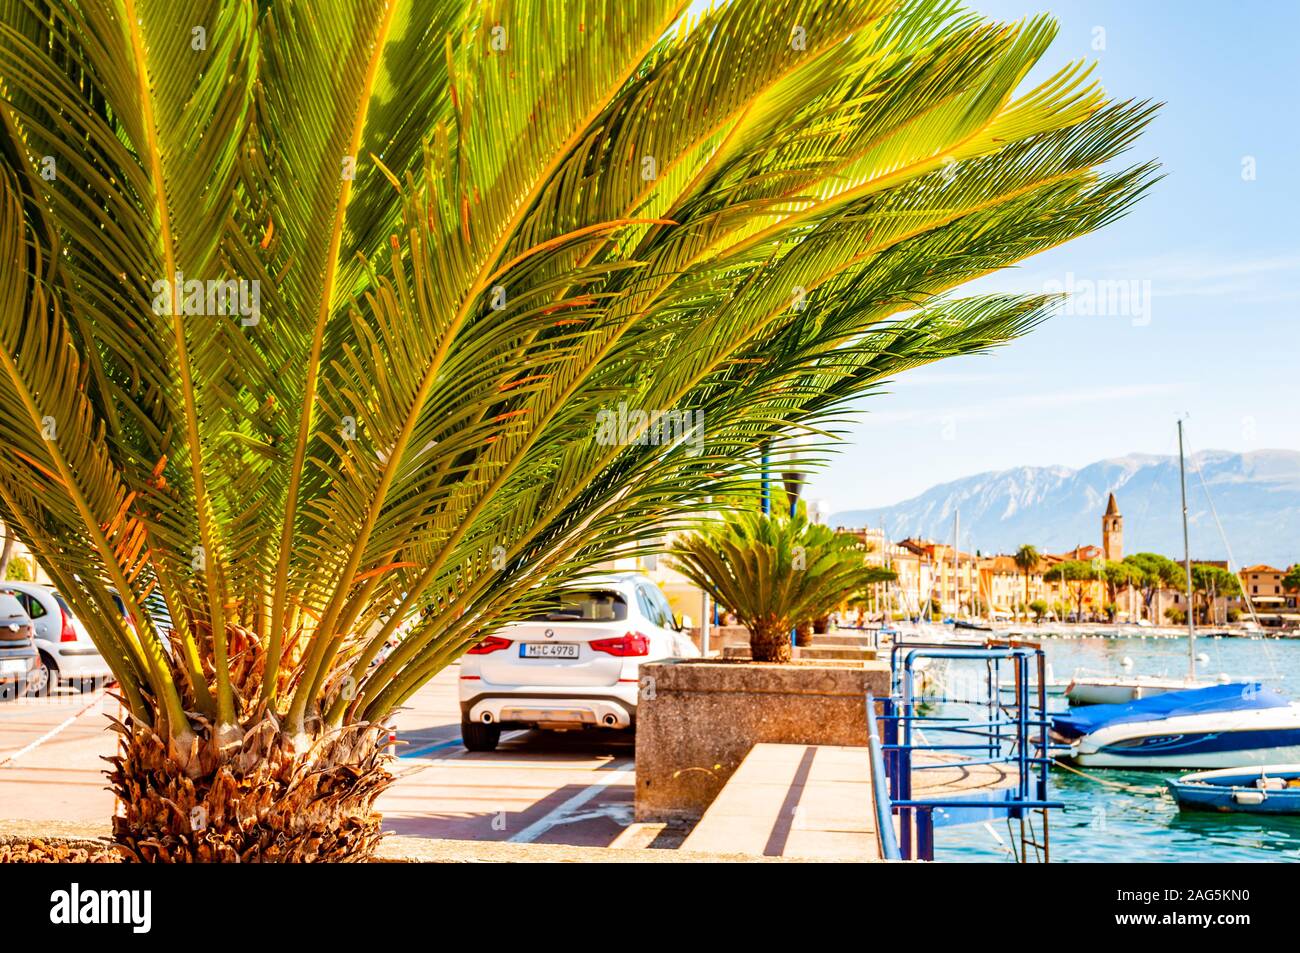 Toscolano Maderno, Lombardy, Italy - September 12, 2019: View on medieval Toscolano Maderno cityscape through palm leaves growing on promenade and pie Stock Photo